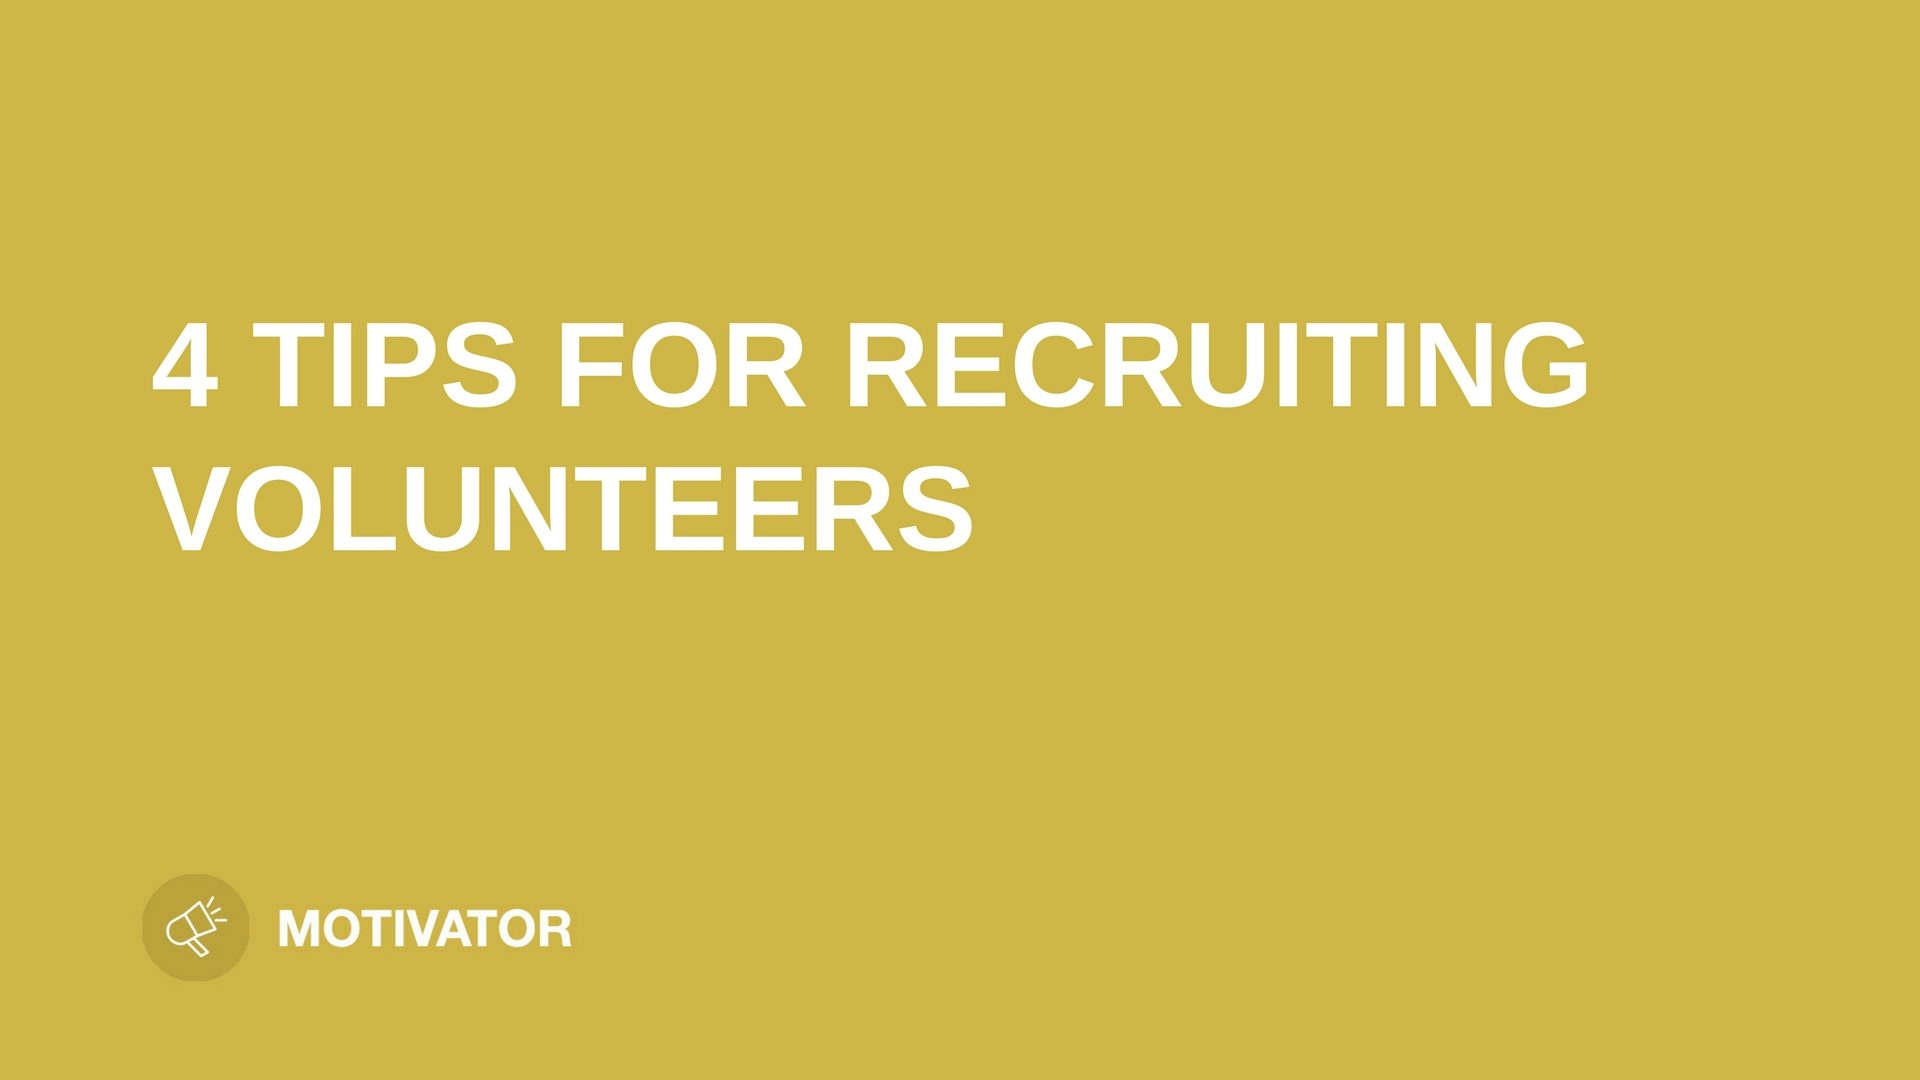 Text "4 tips for recruiting volunteers" on yellow background